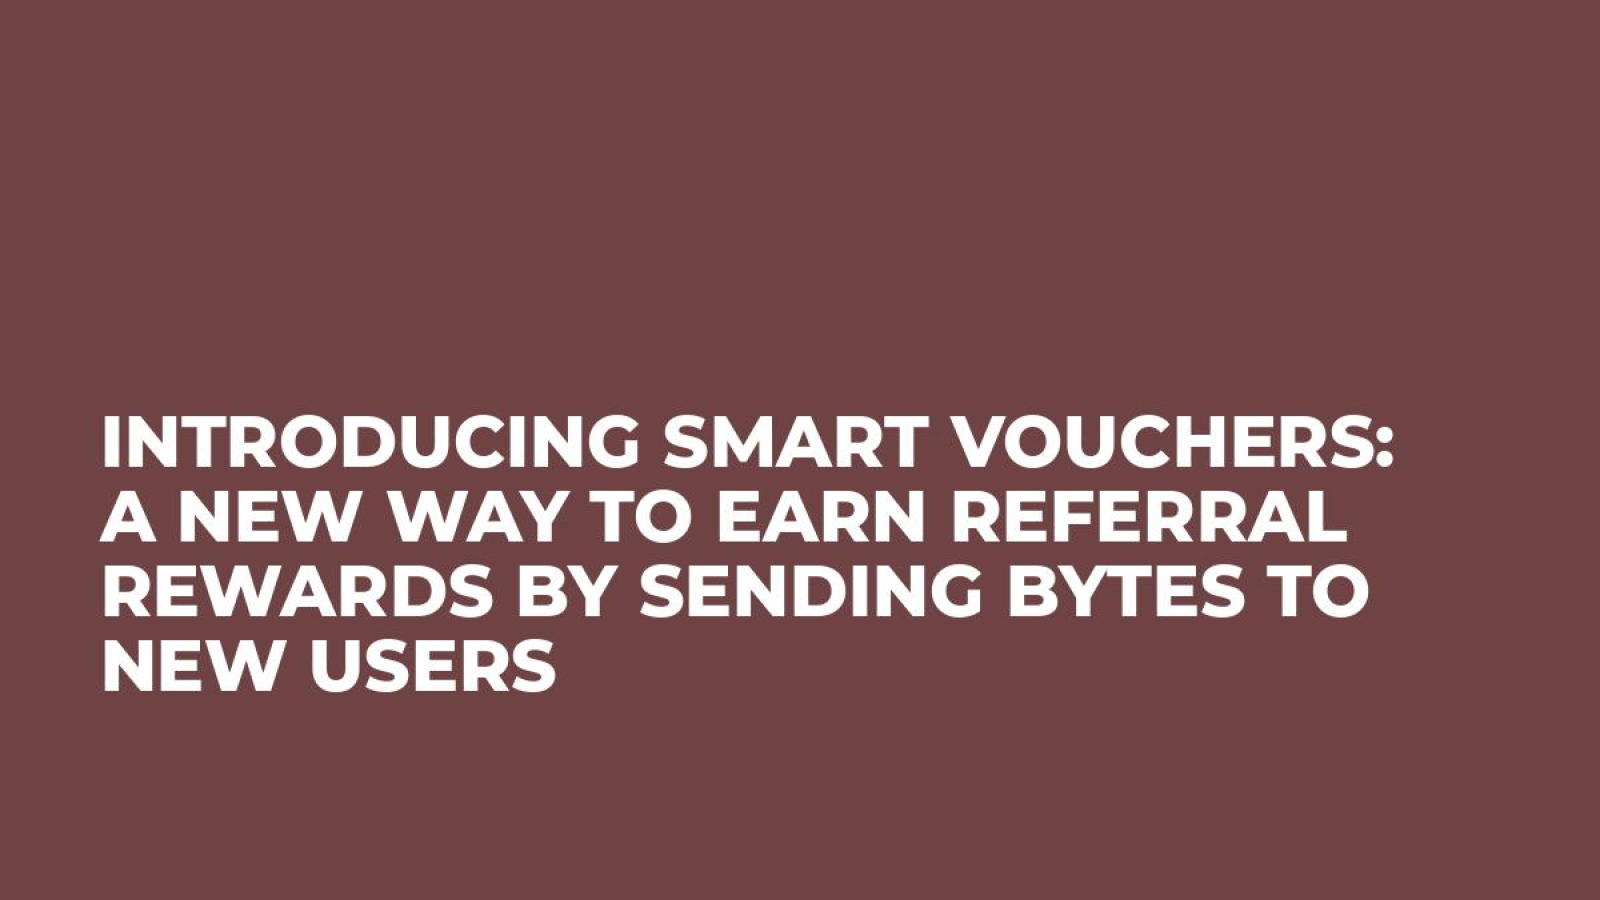 Introducing Smart Vouchers: a new way to earn referral rewards by sending Bytes to new users